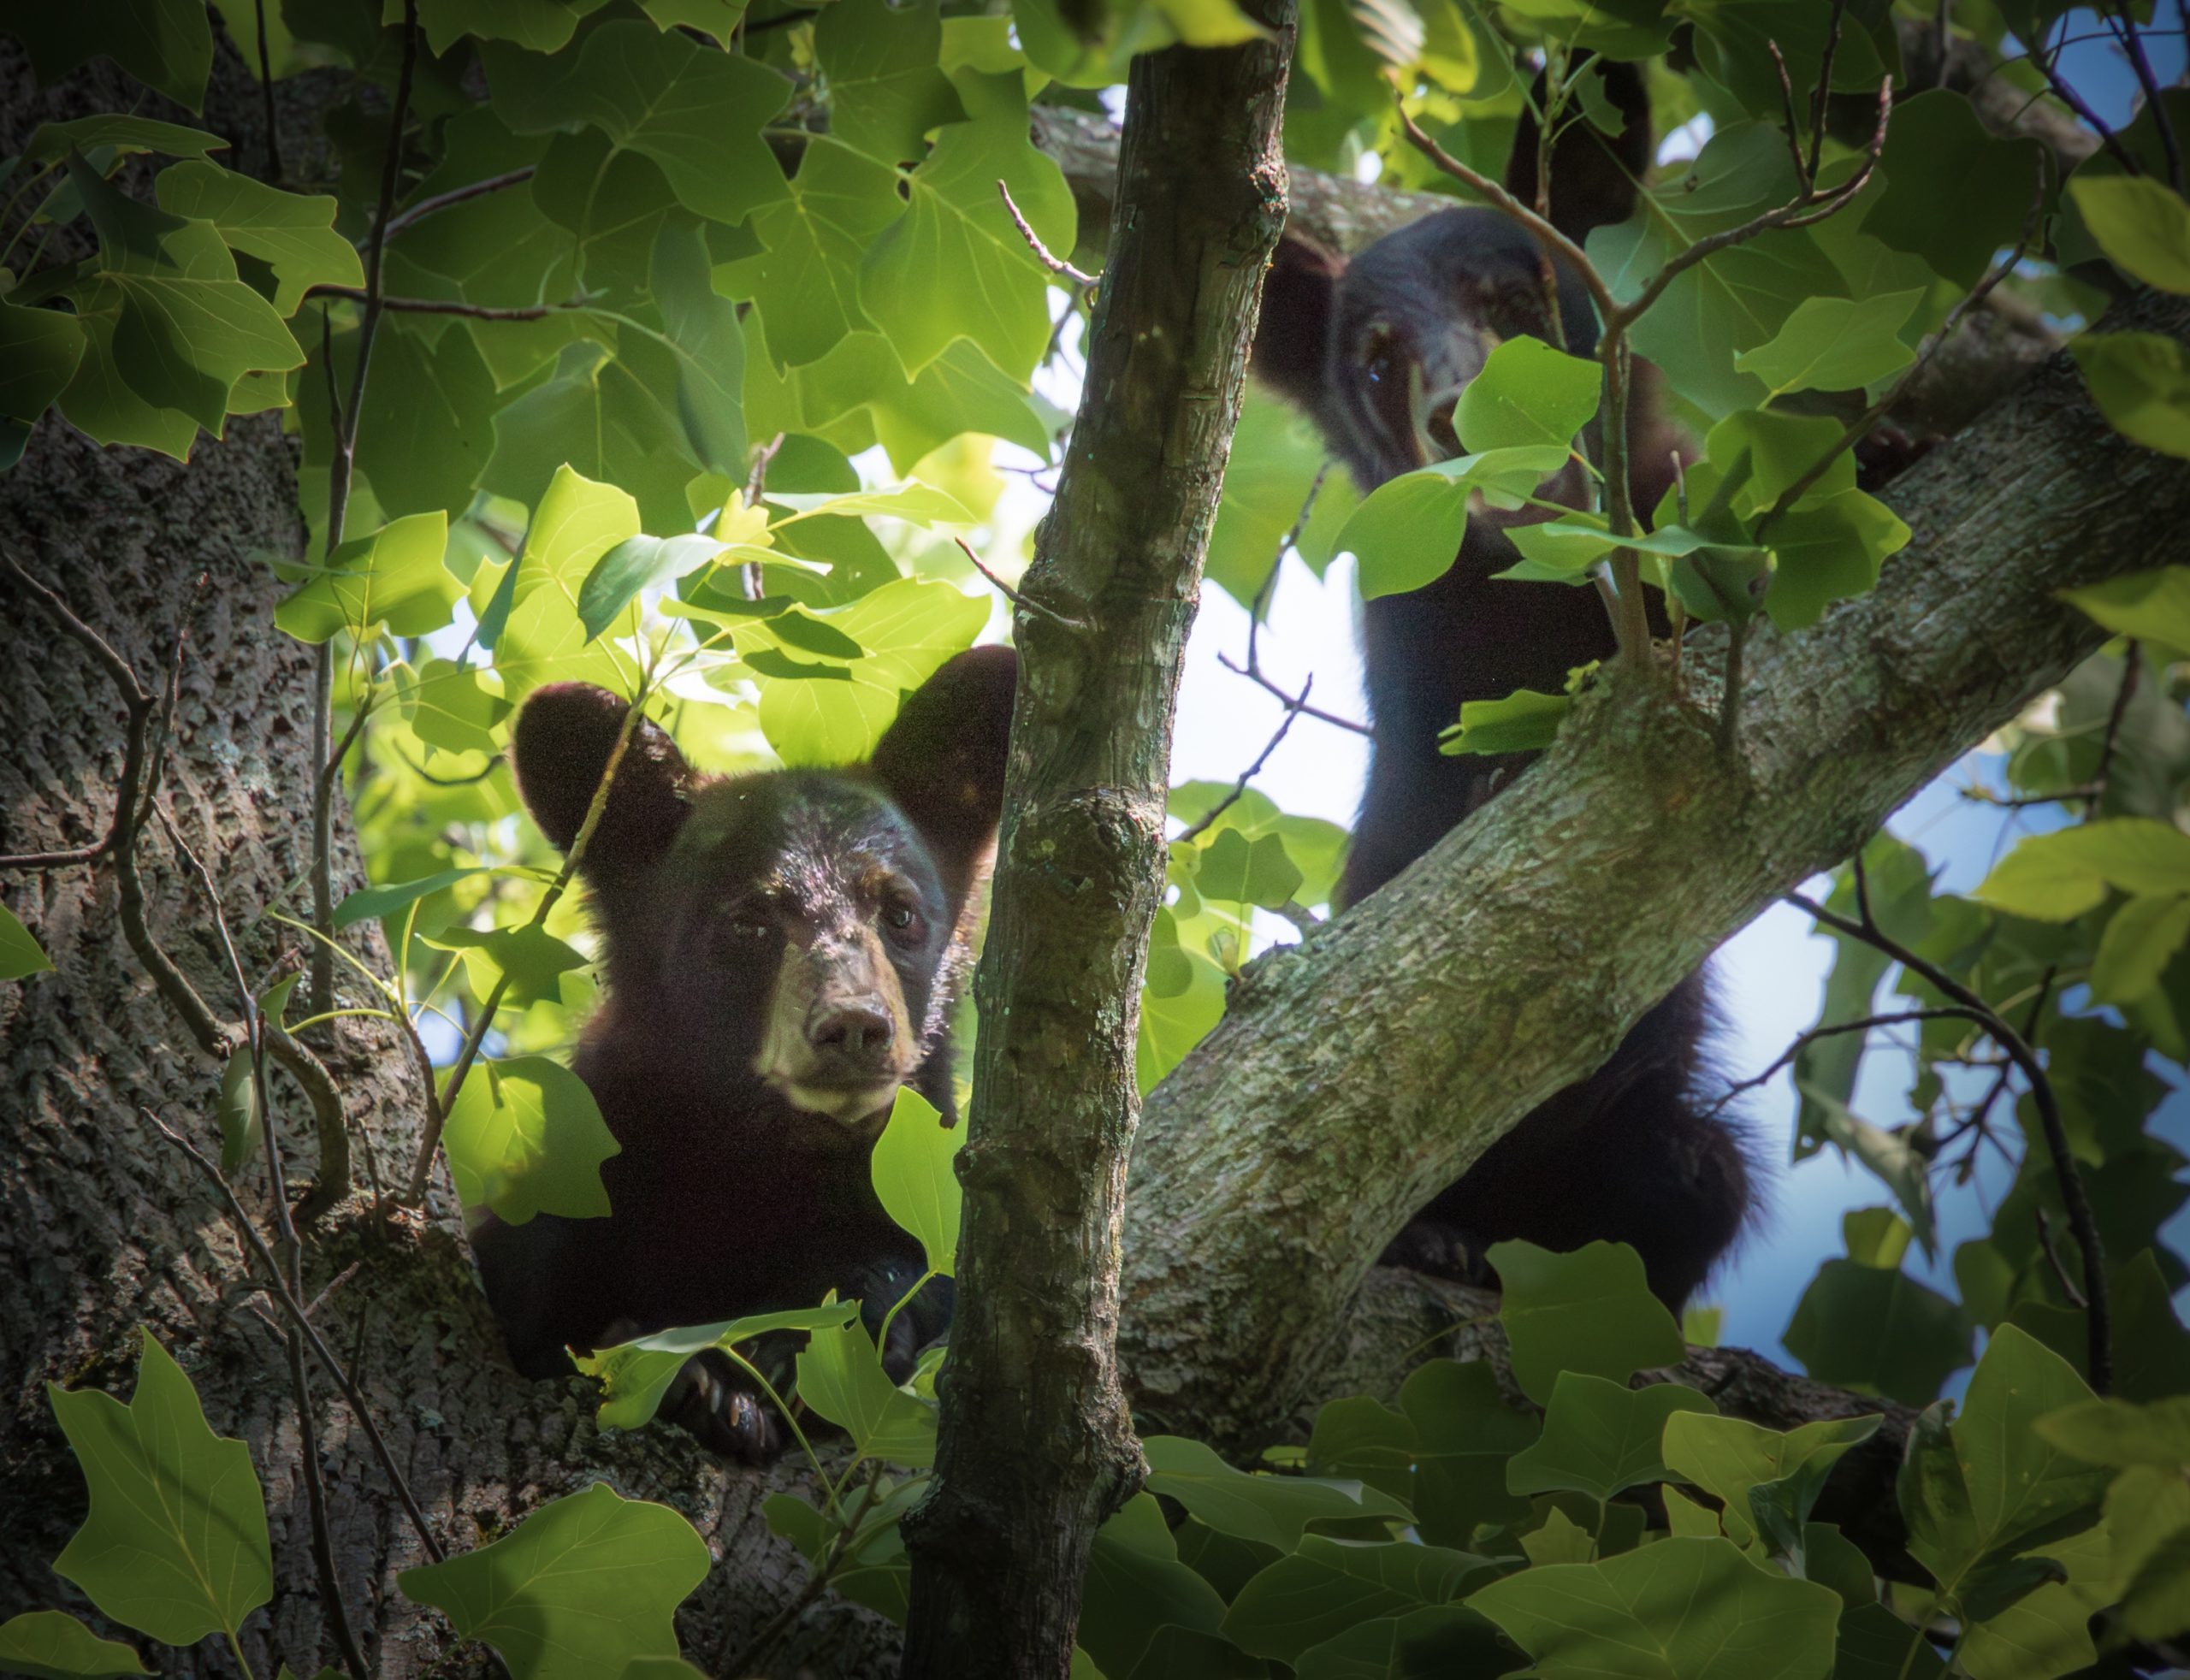 Two bear cubs in a tree